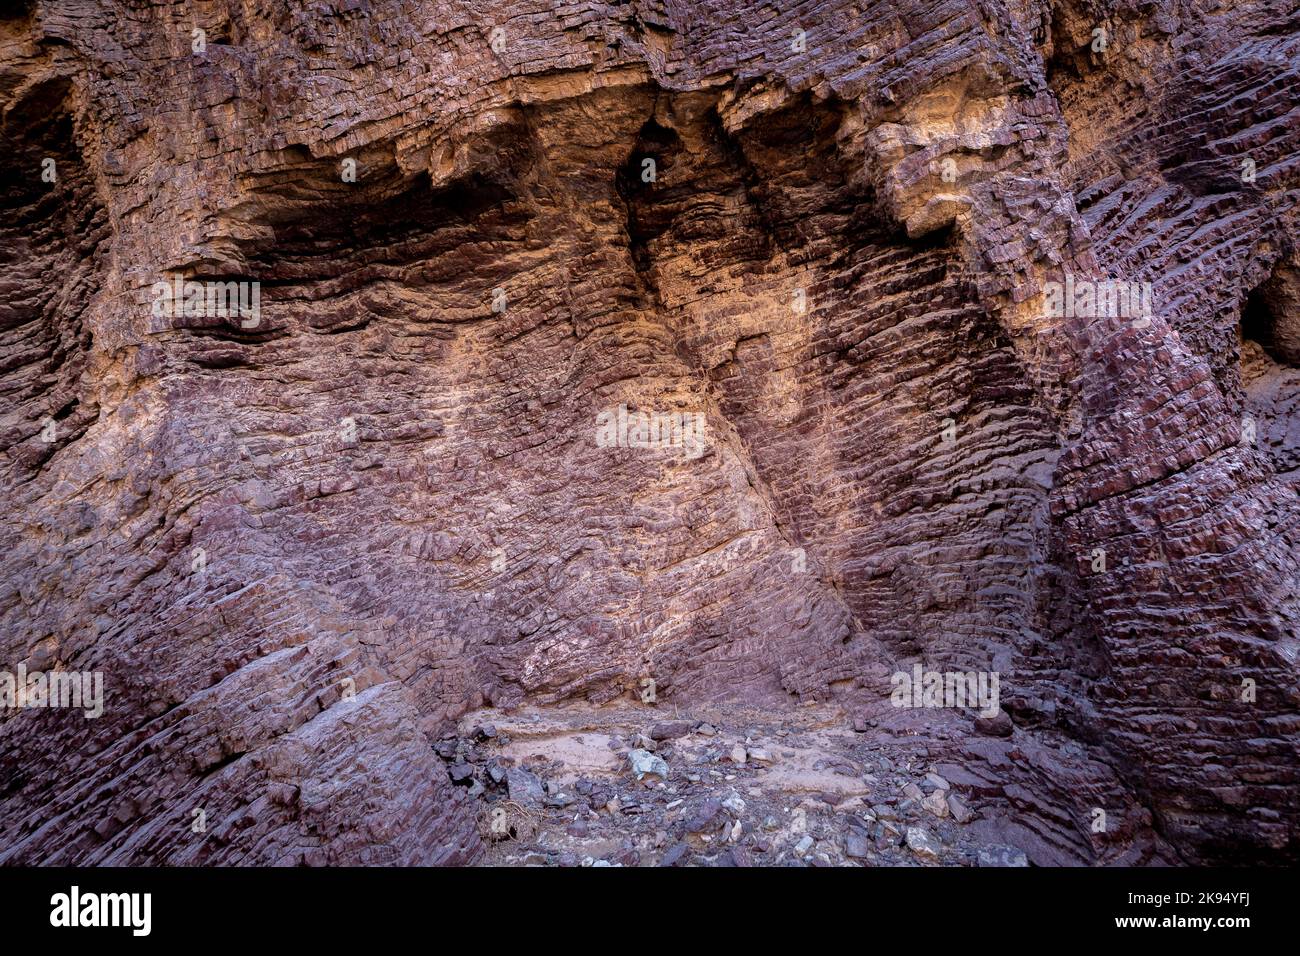 Huge fossil rocks and naturally created mountains from UAE Stock Photo